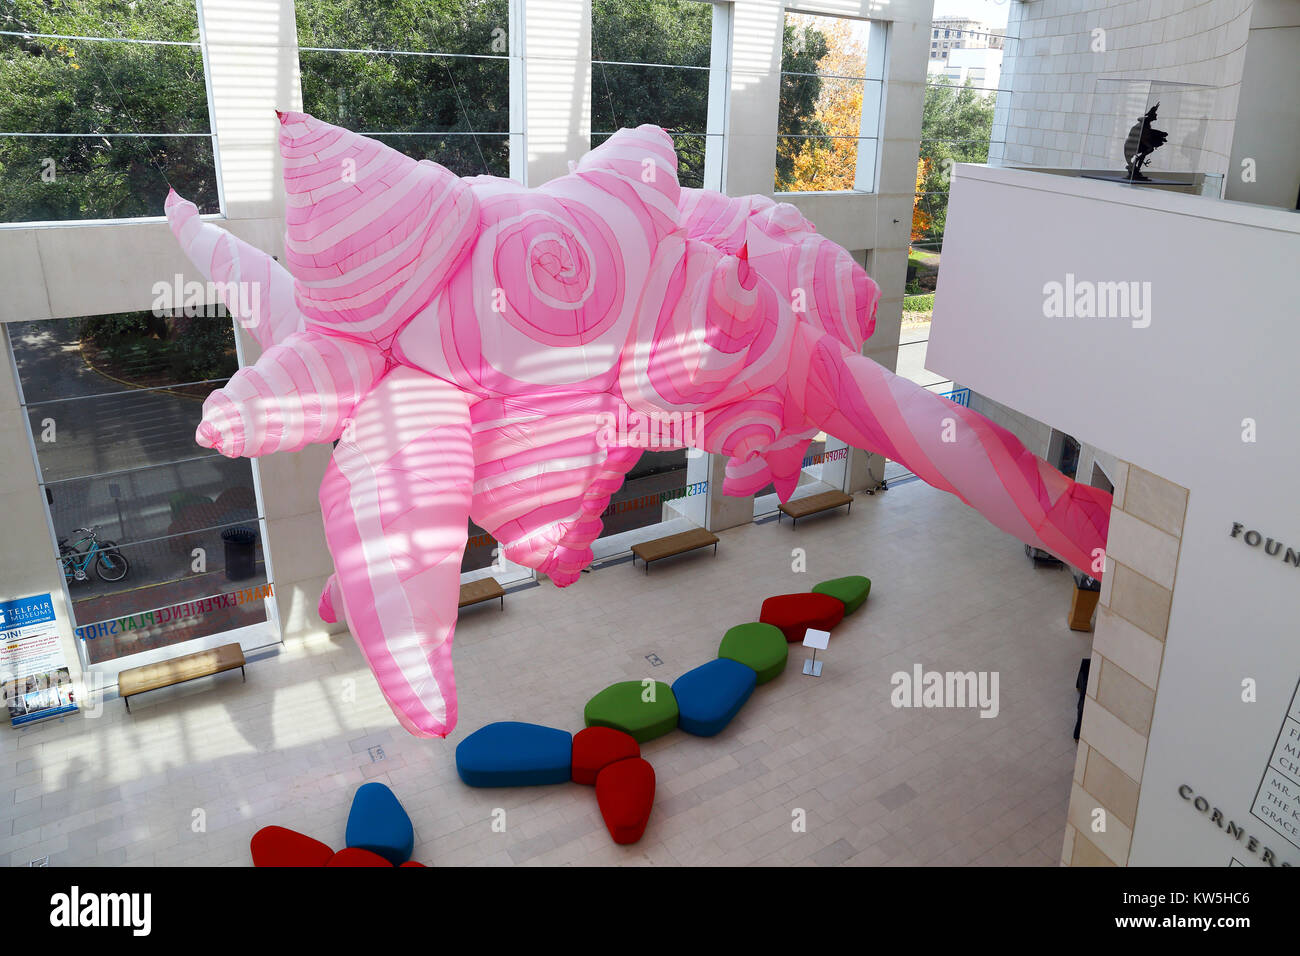 A large inflatable installation piece by artist Anne Ferrer hangs from the cieling of the Jepson Center Eckburg Atrium in Savannah Georgia. Stock Photo